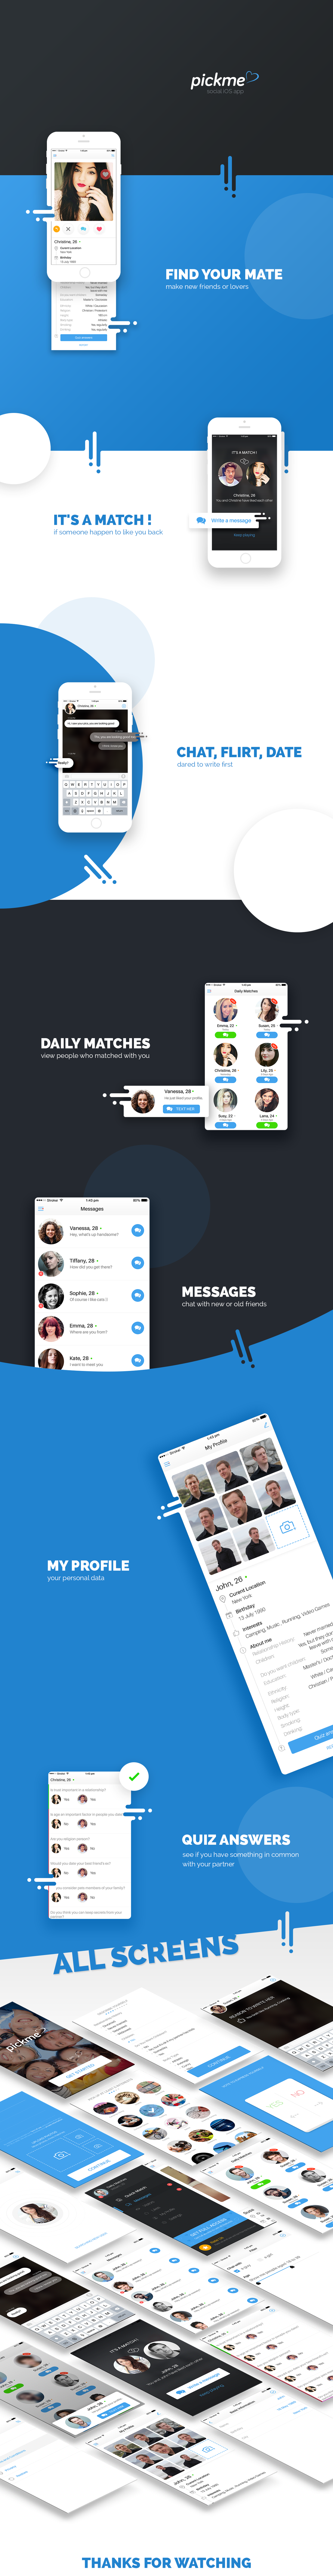 pickme ios mobile blue Chat messages apple